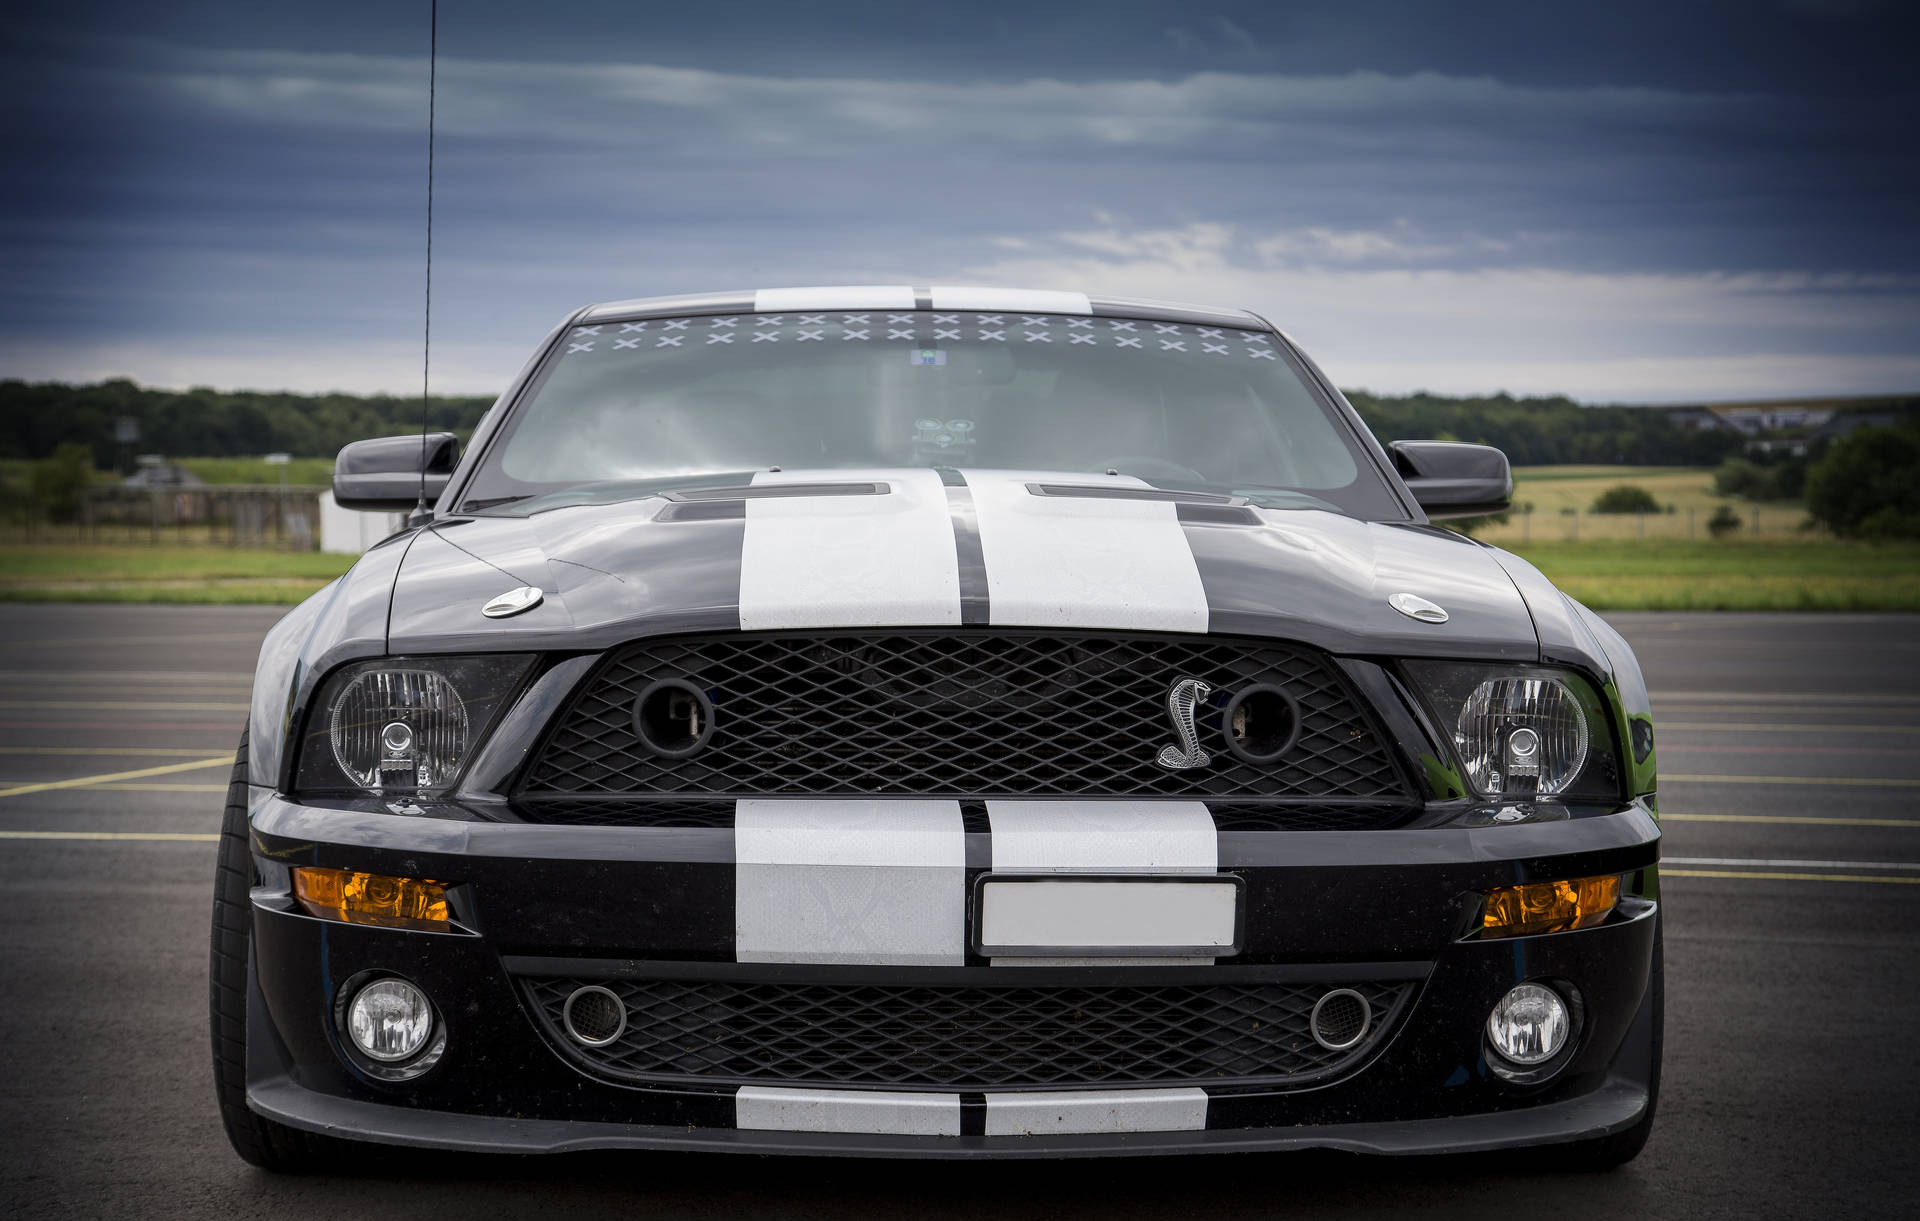 Mustang 5386X3426 Wallpaper and Background Image